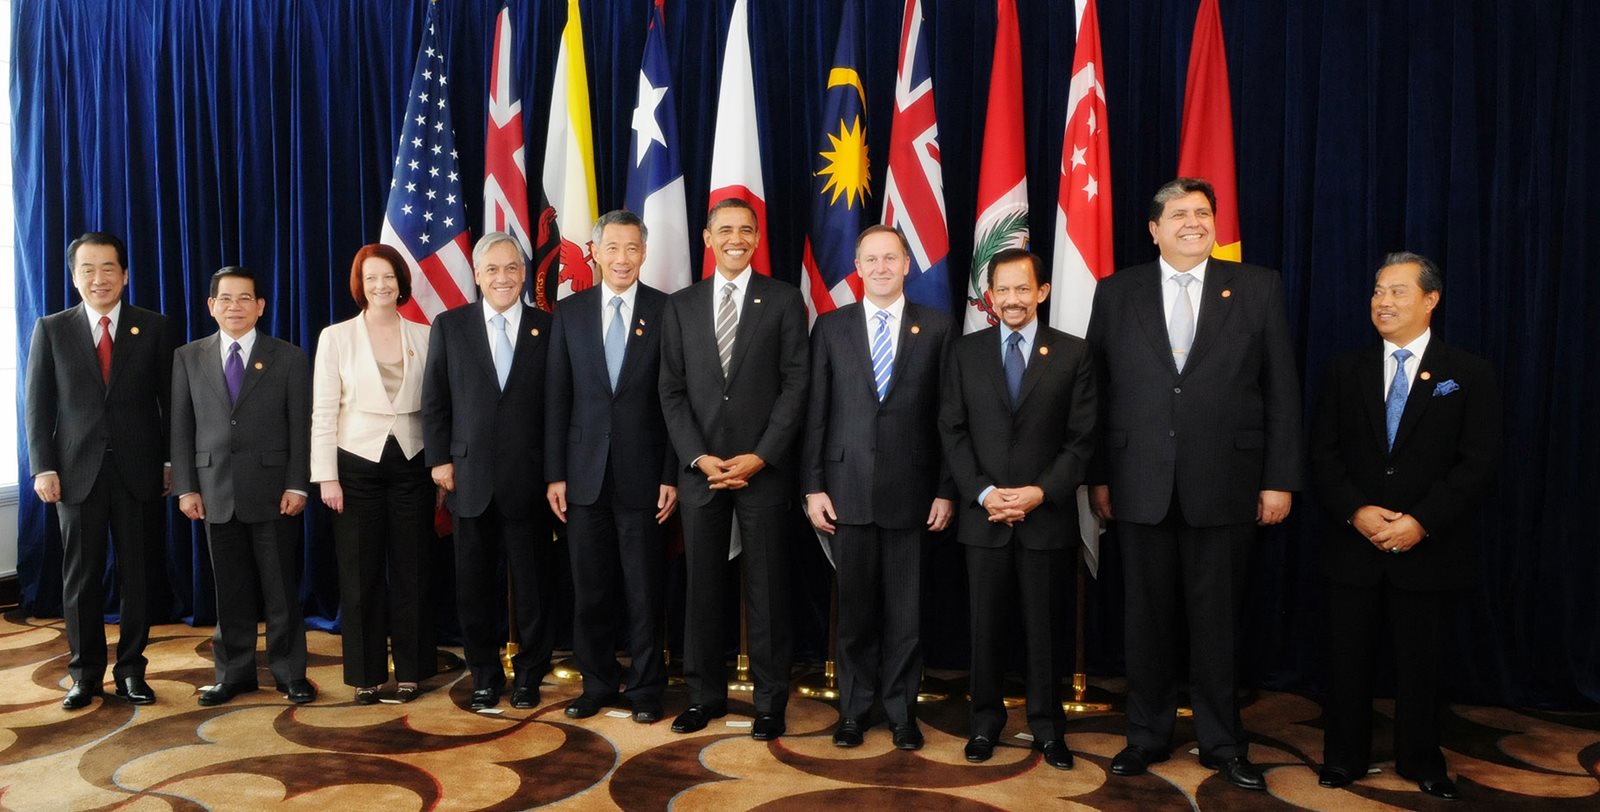 Leaders of TPP member states and prospective member states at a TPP summit in 2010.